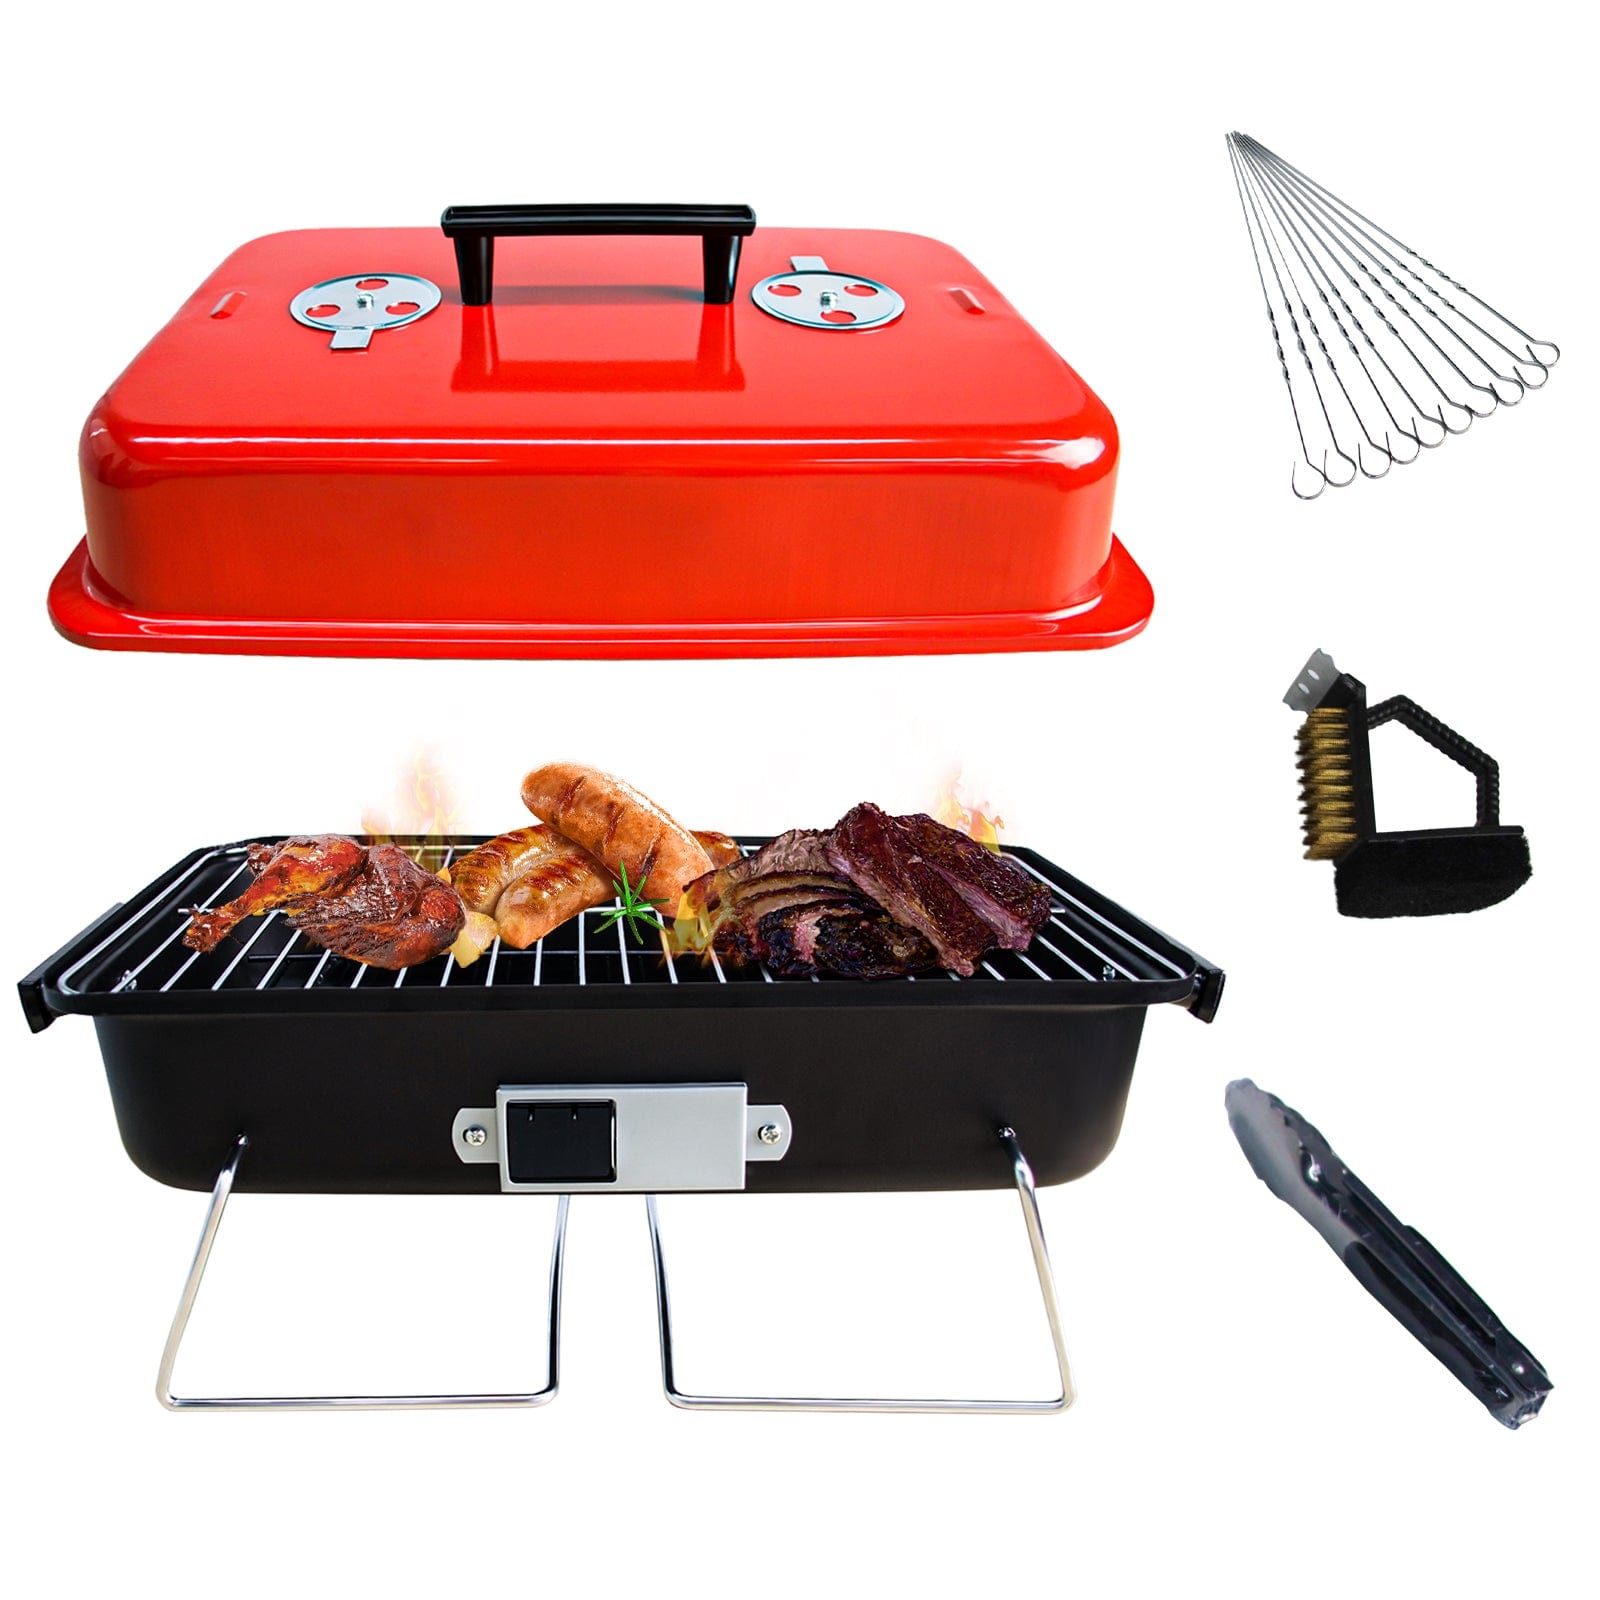 GeerTop Outdoor Store grill GeerTop Portable Charcoal Grill With Lid